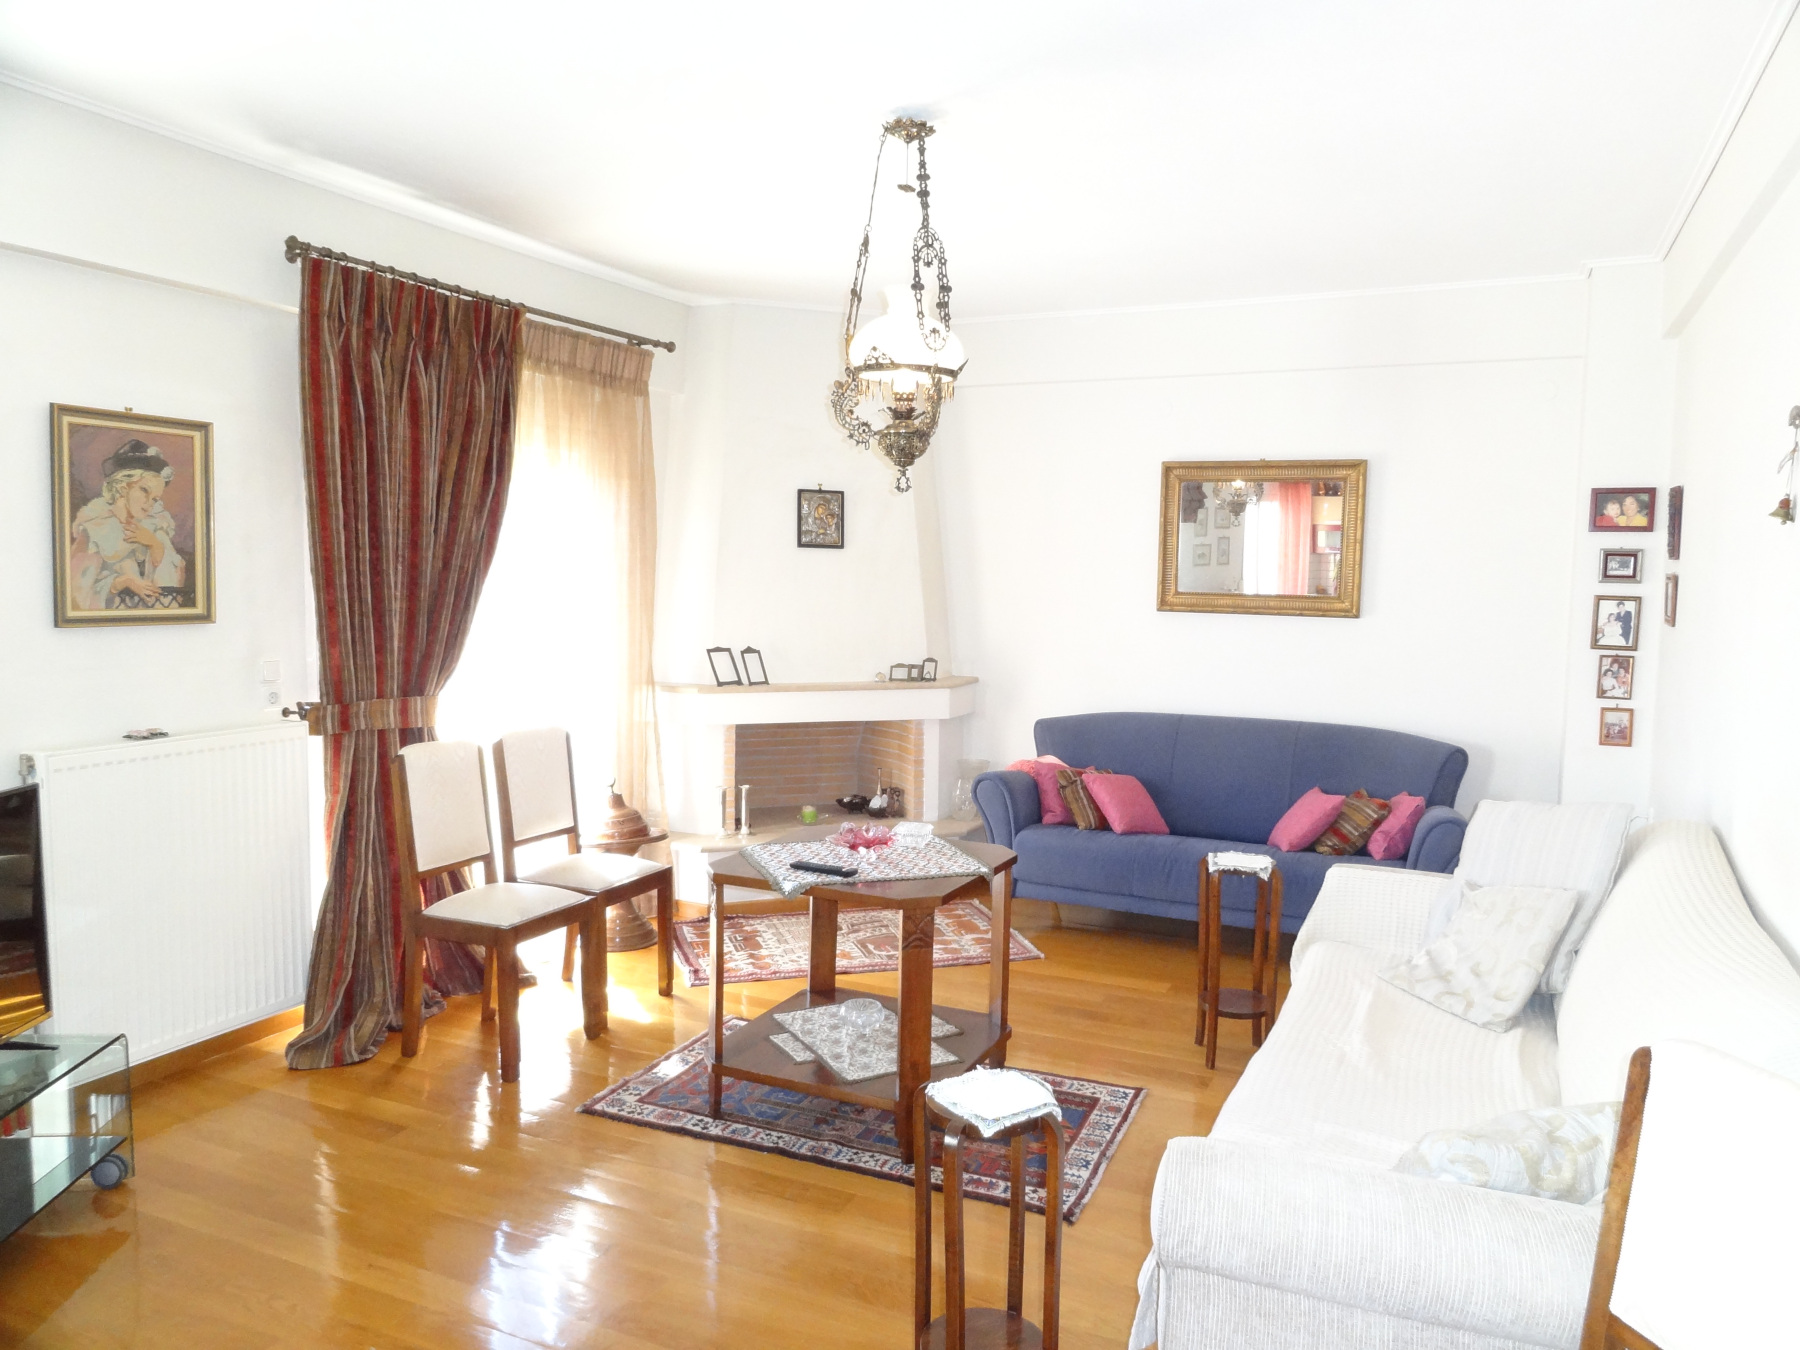 Furnished and airy 3-room apartment for rent, 95 sq.m. 3rd floor with parking space very close to the central square of Ioannina